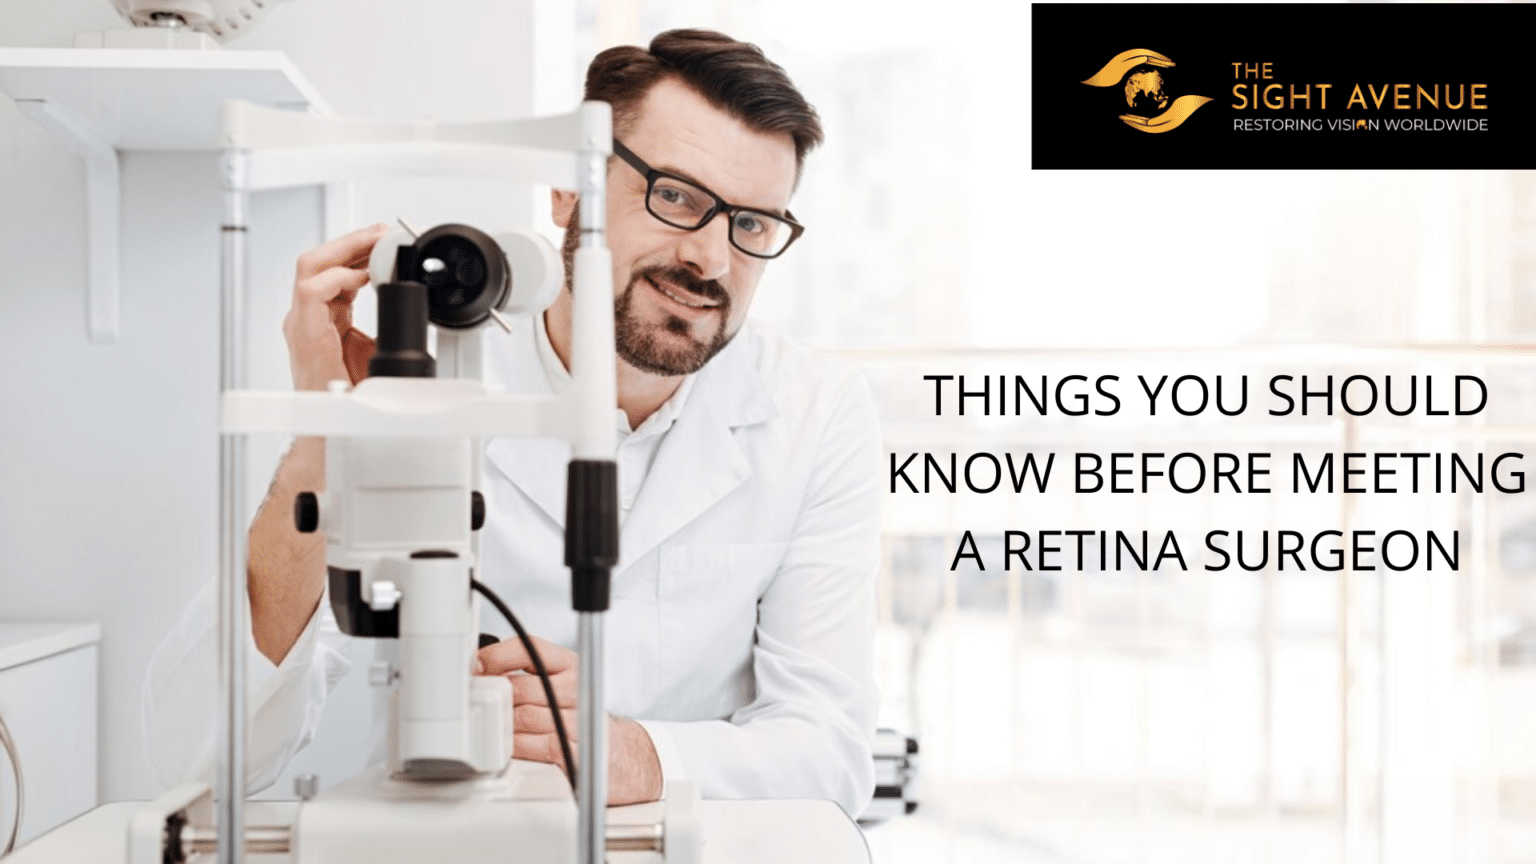 Things You Should Know Before Meeting Retina Surgeon for the First Time